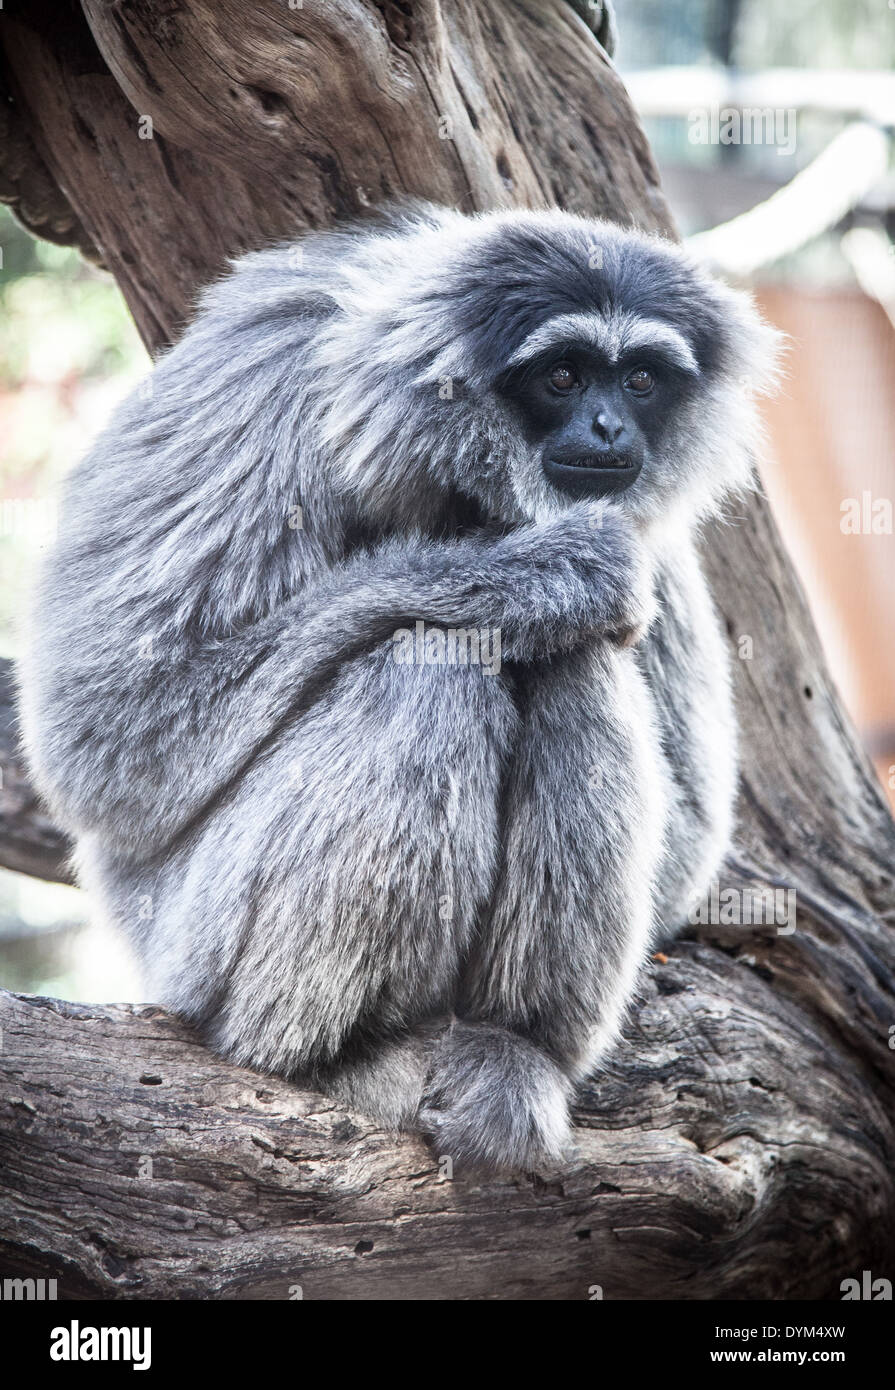 A downcast-looking Silvery Gibbon in a zoo Stock Photo